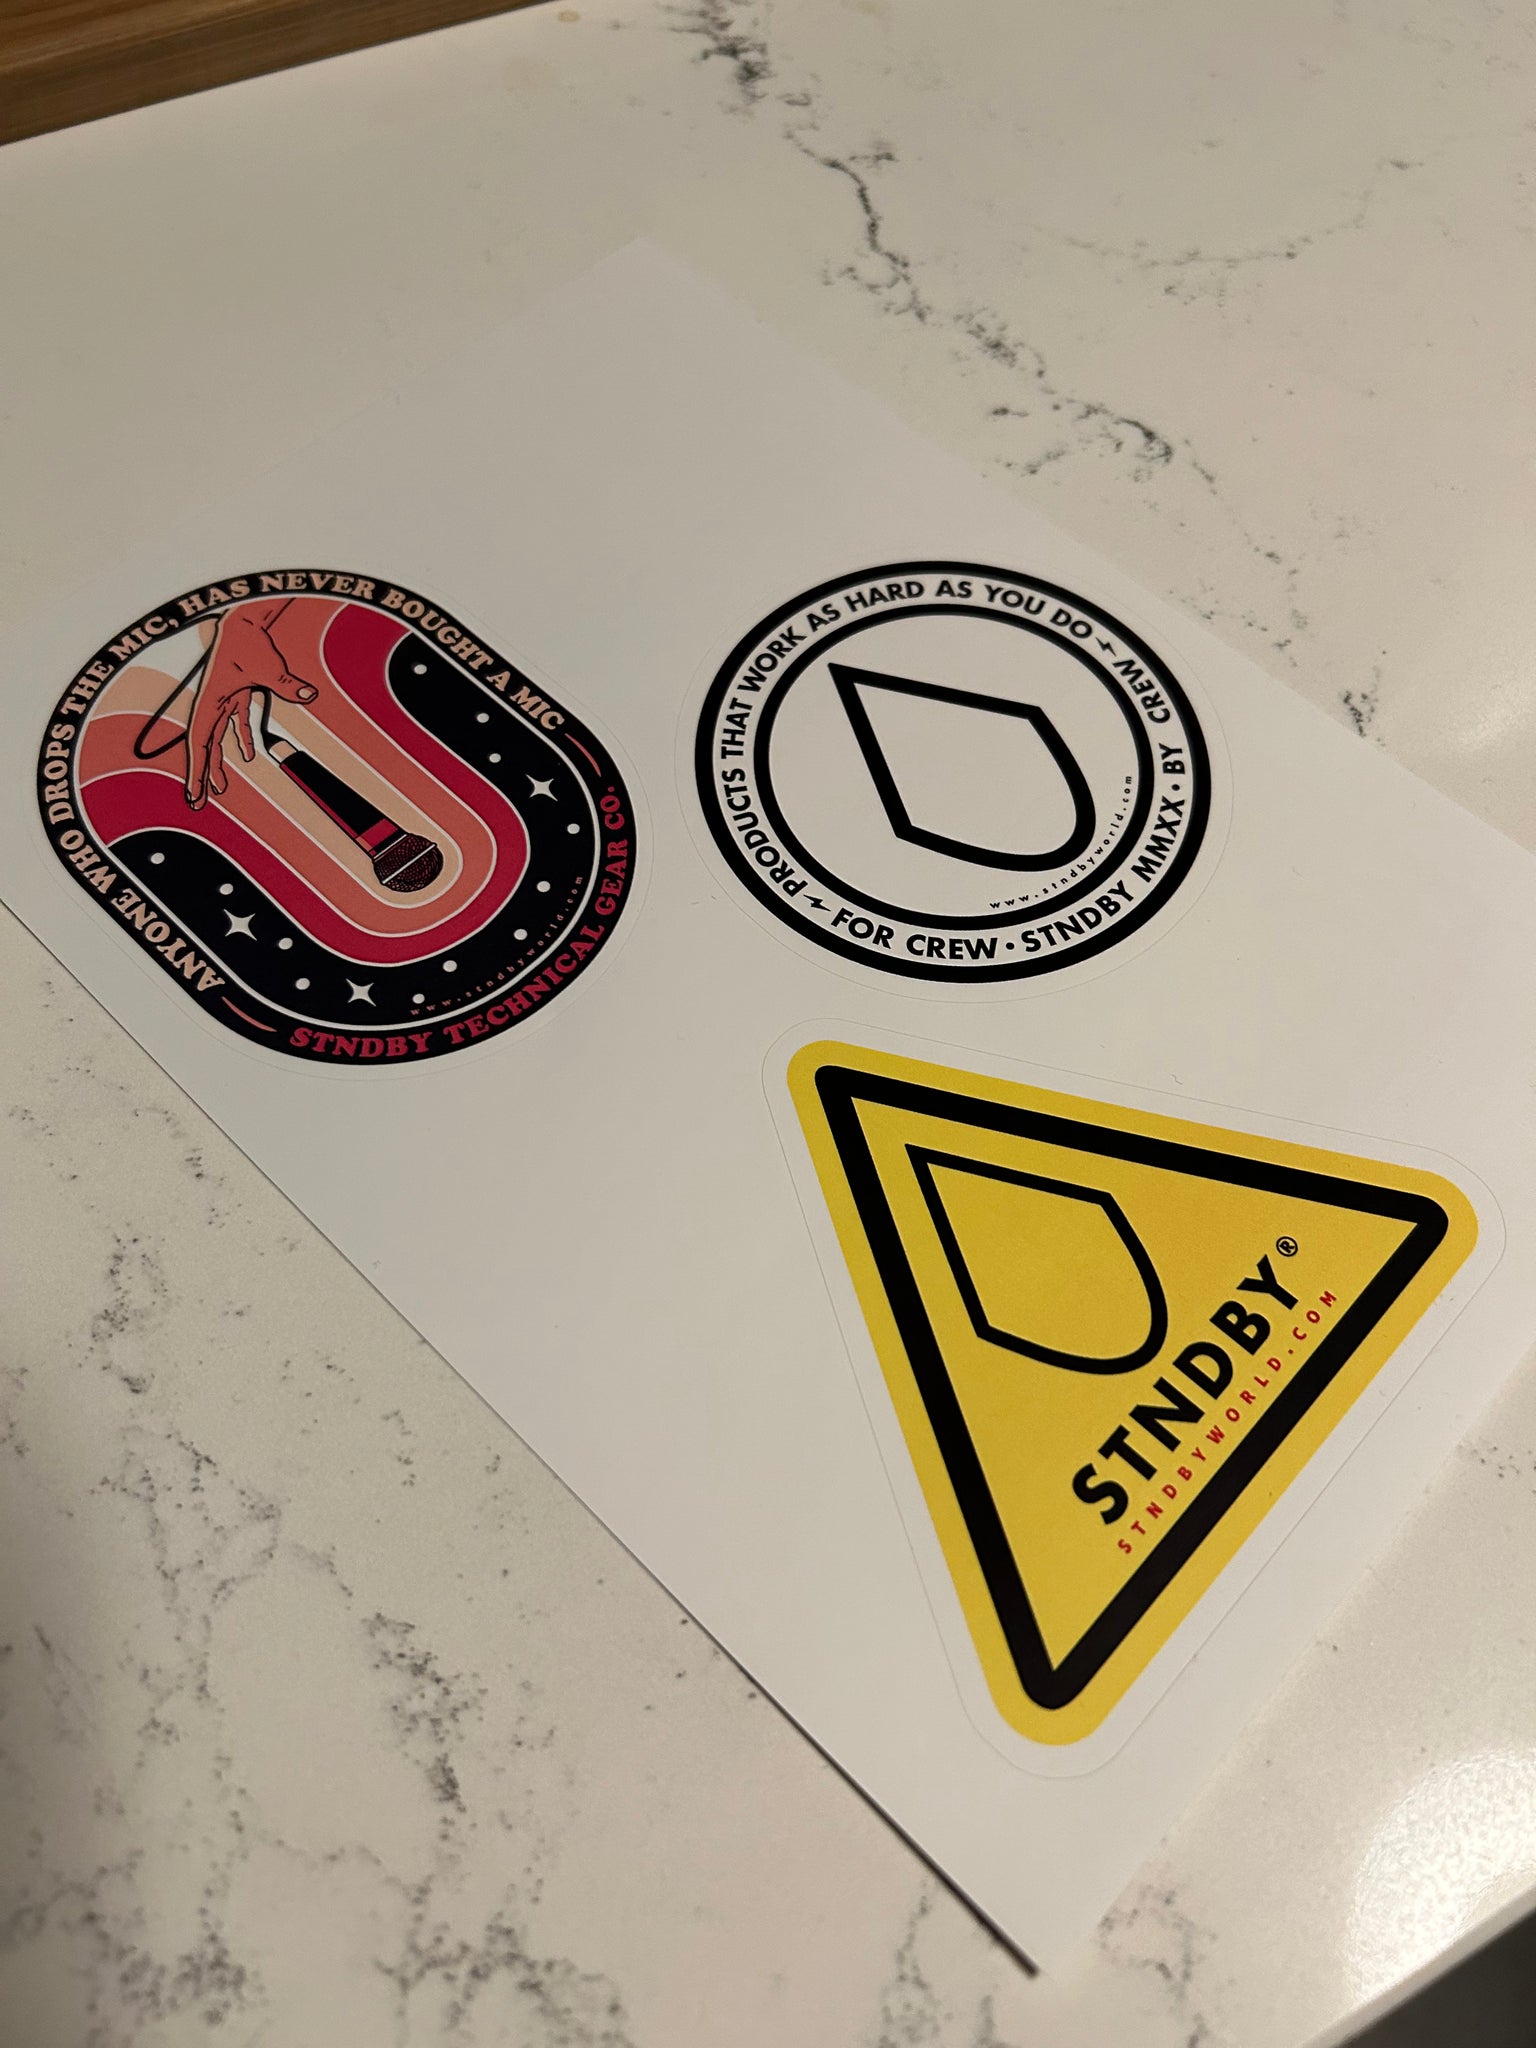 STNDBY STICKERS v1 (LIMITED EDITION)